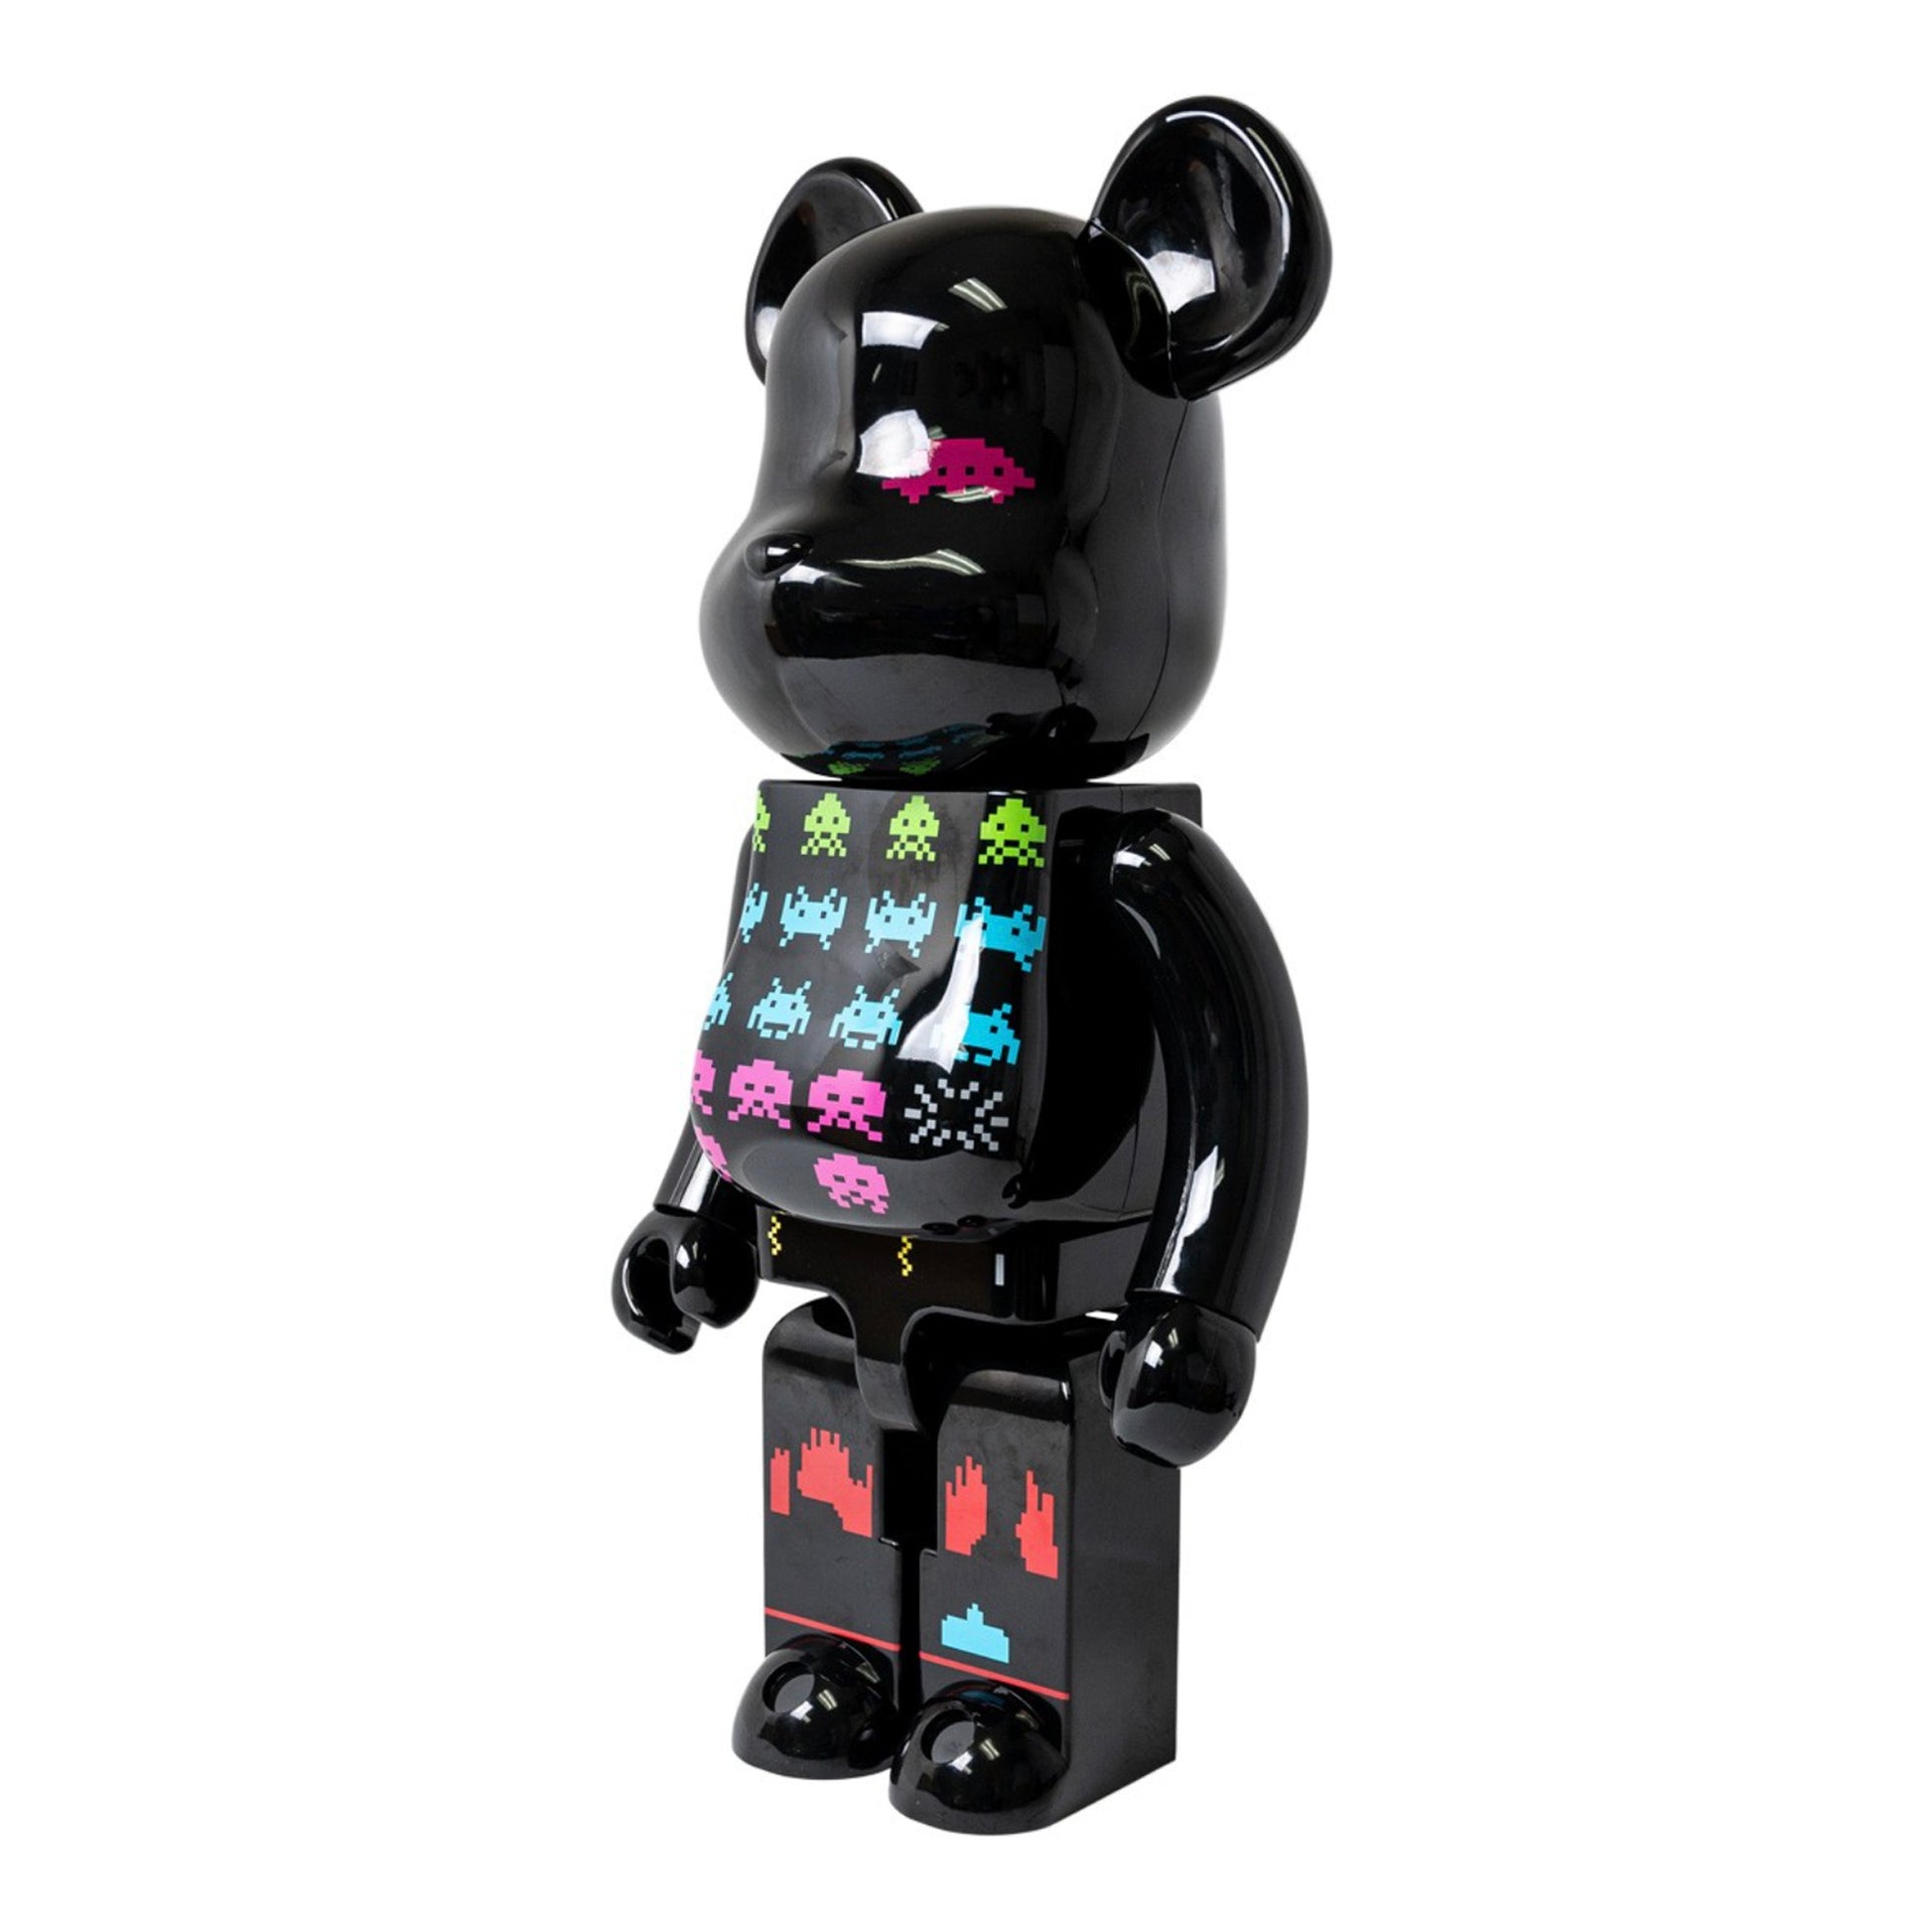 Medicom Toy BEARBRICK Space Invaders 1000% Available For Immediate Sale At  Sotheby's